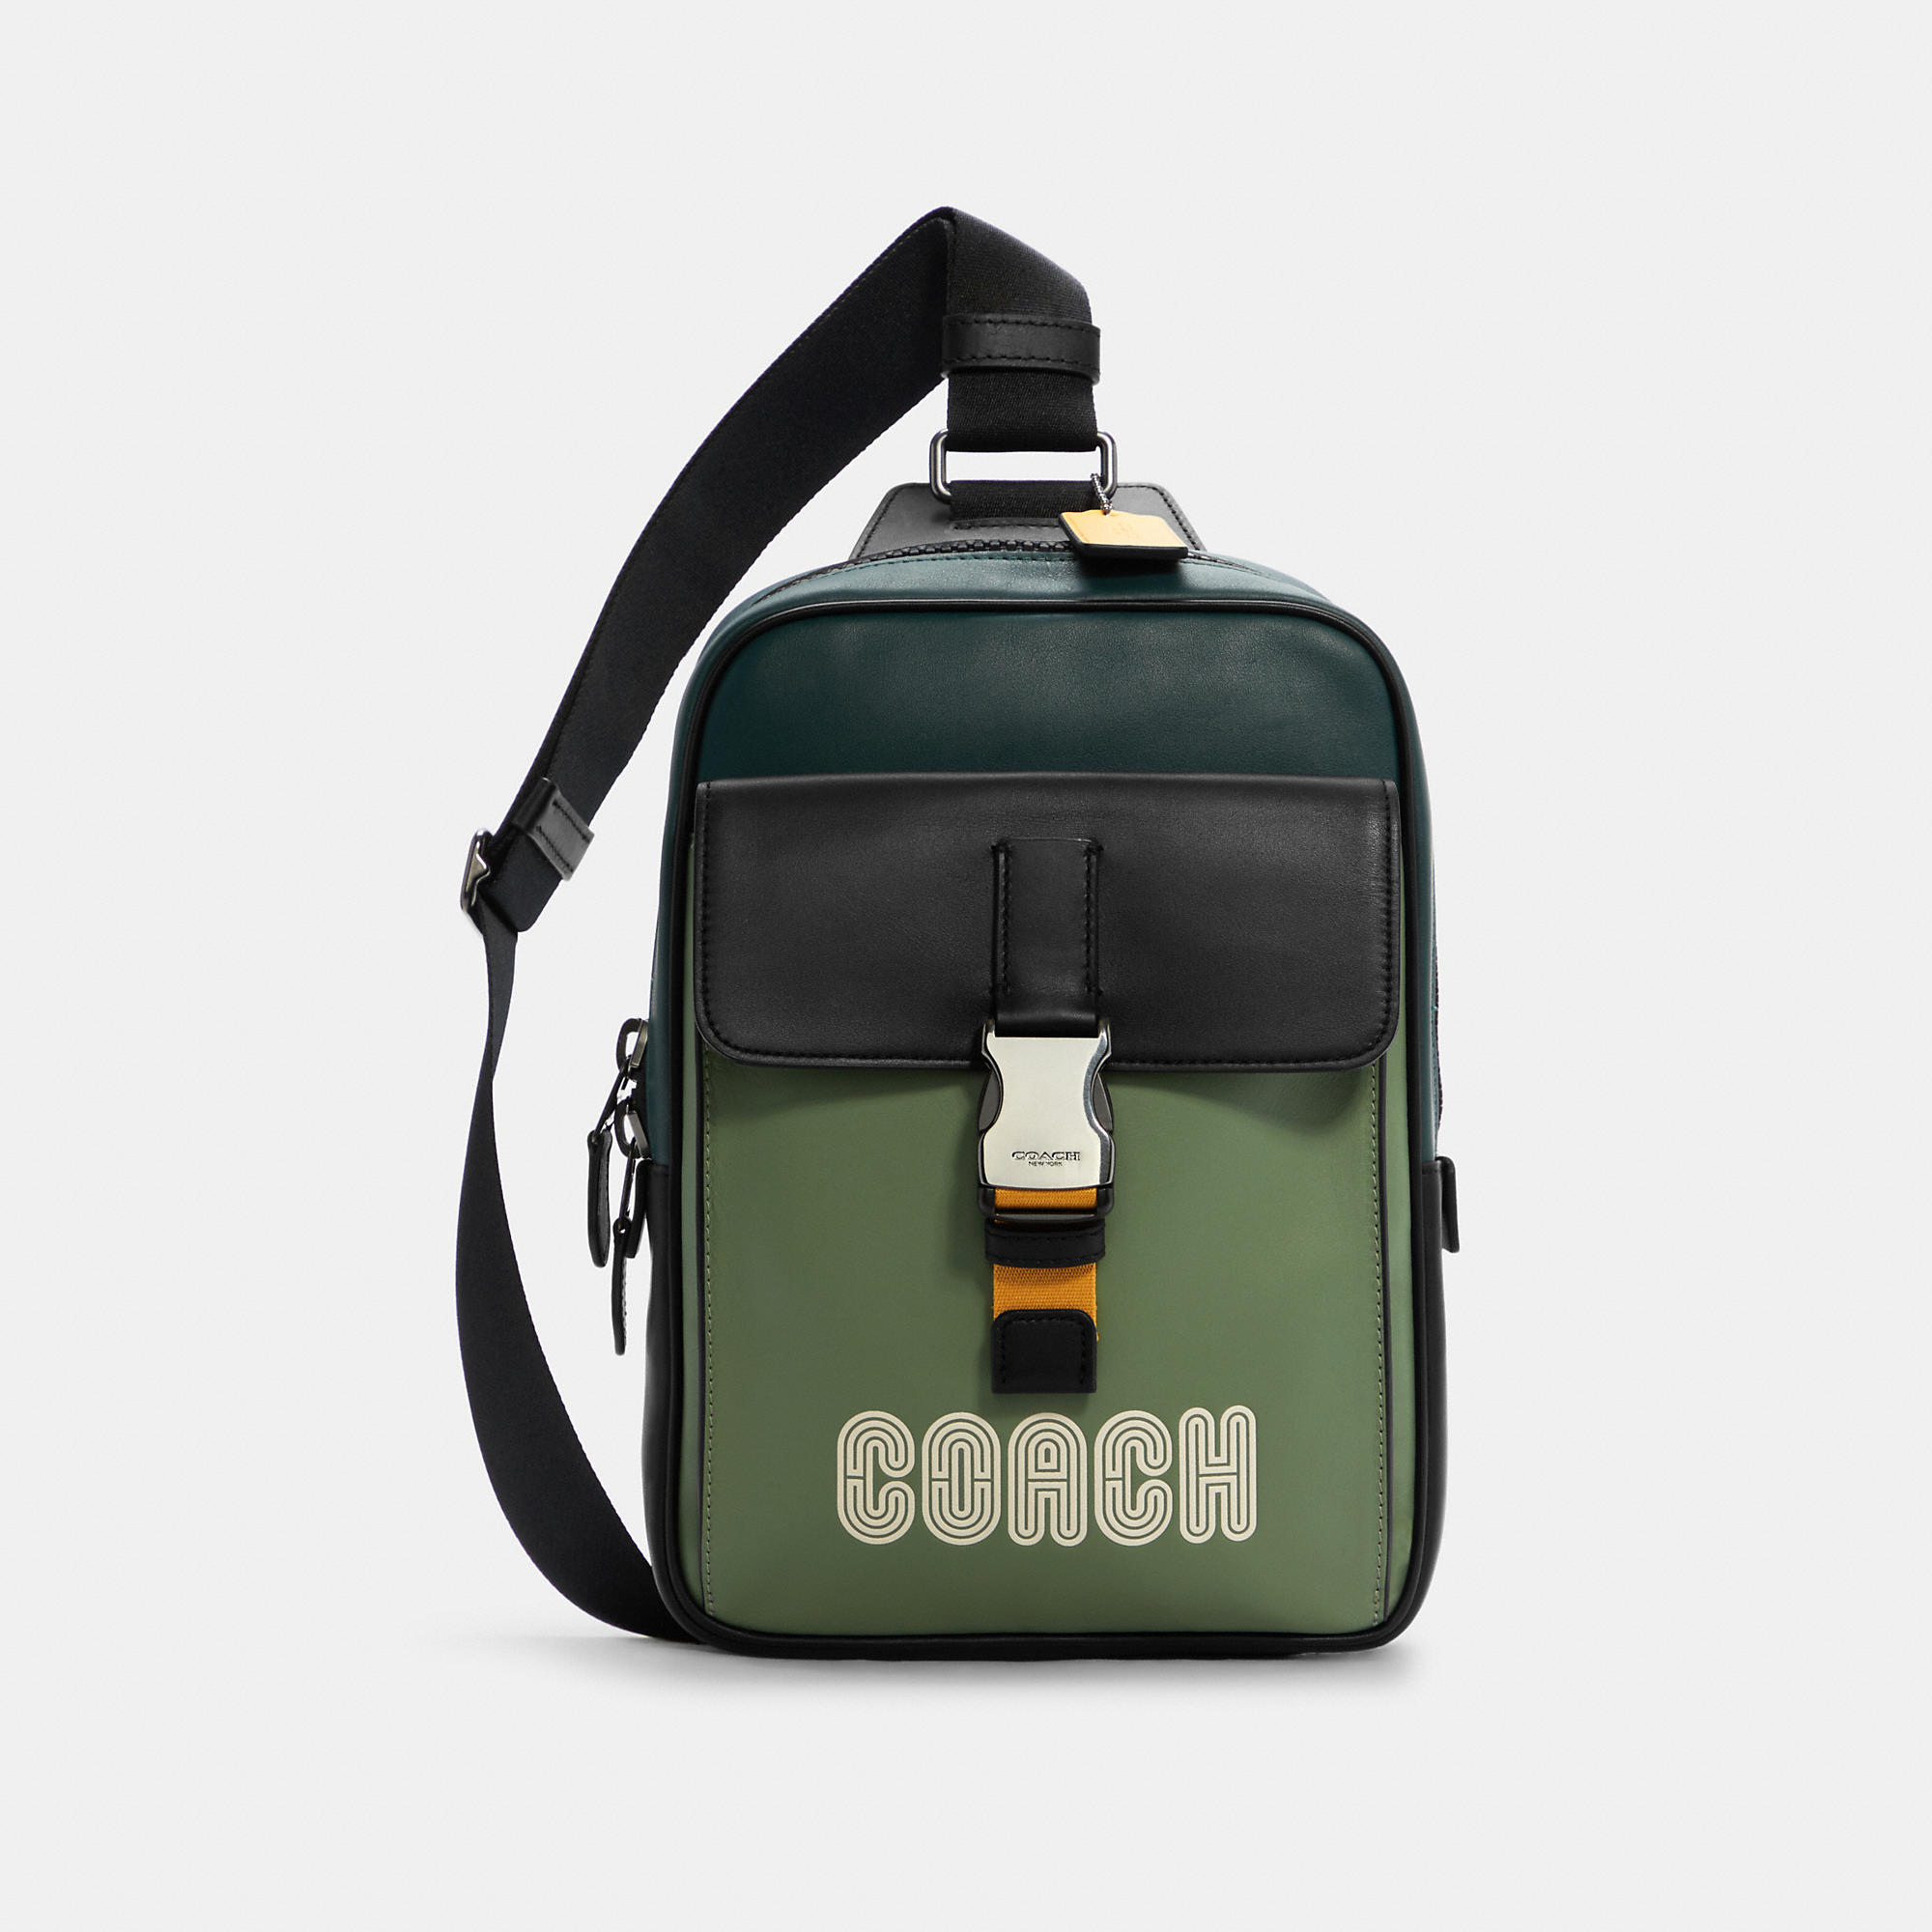 COACH Men's Track Pack In Colorblock With Patch - Gunmetal/forest Agate Multi